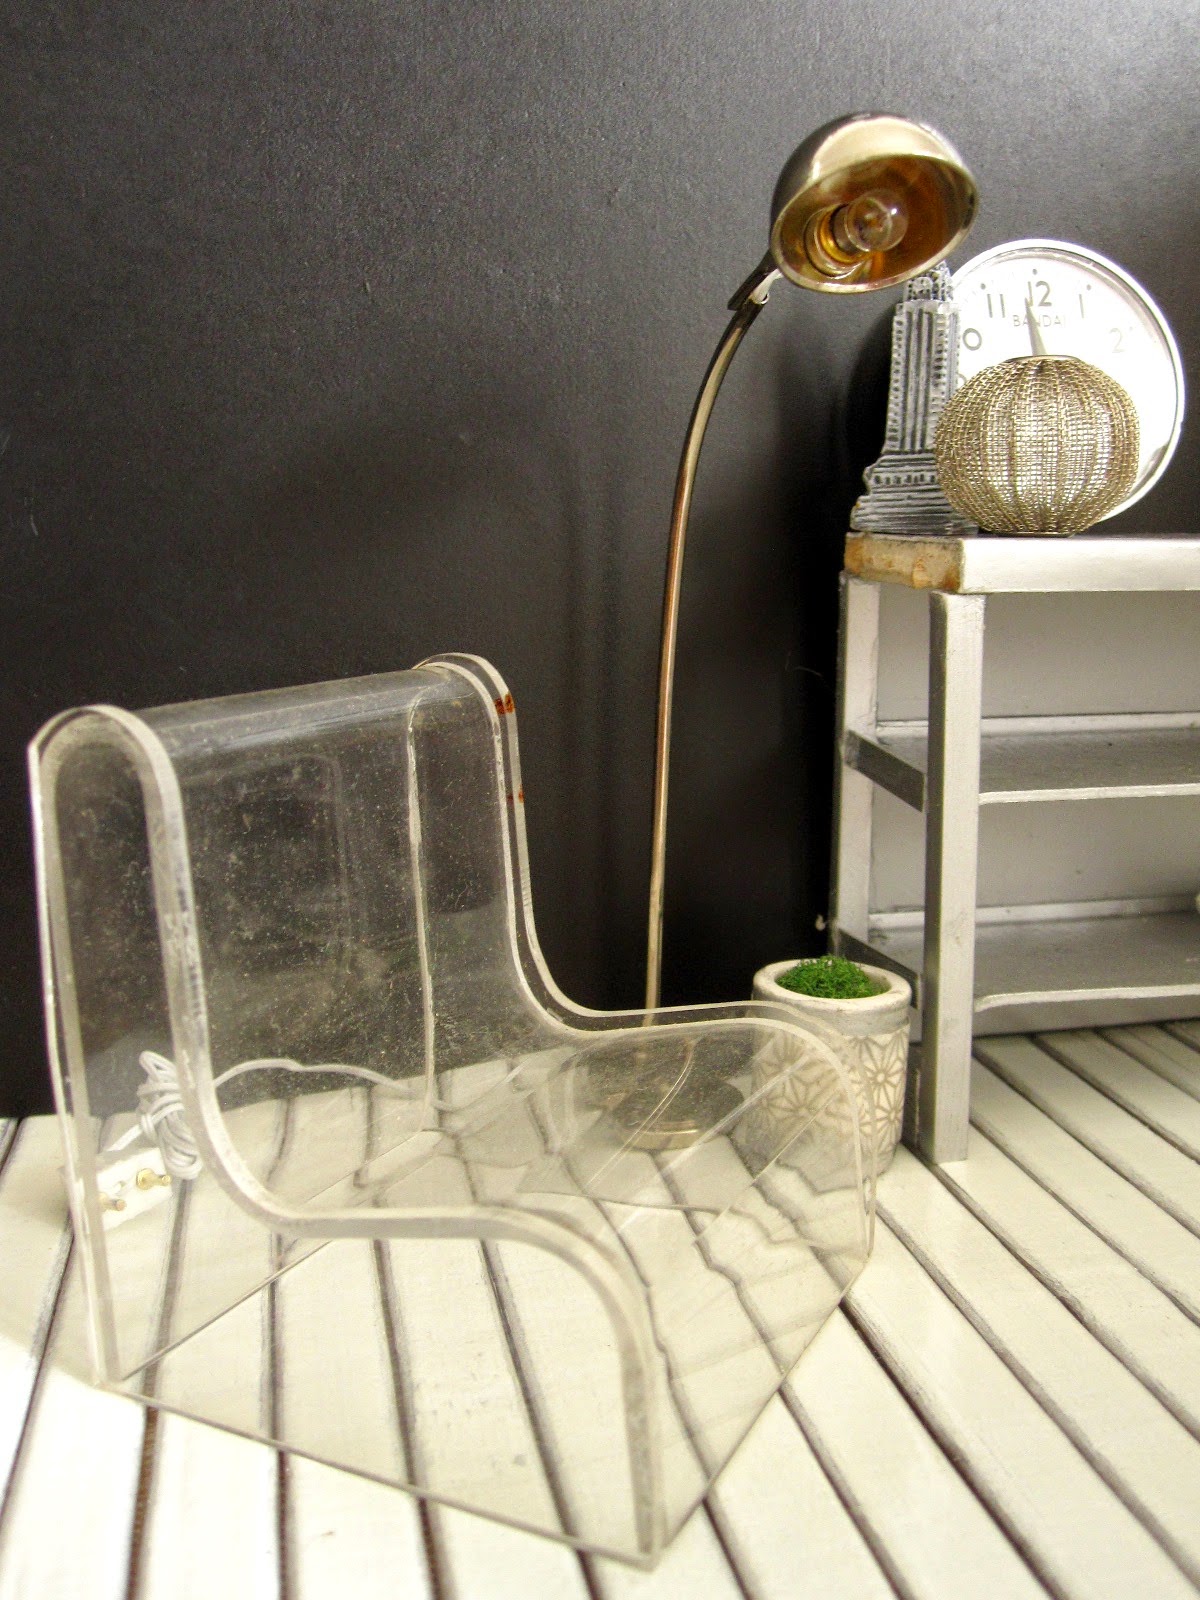 Corner of a modern dolls' house miniature interiors shop, with a clear perspex lounge chair, a silver floor lamp and a grey industrial bench on display.